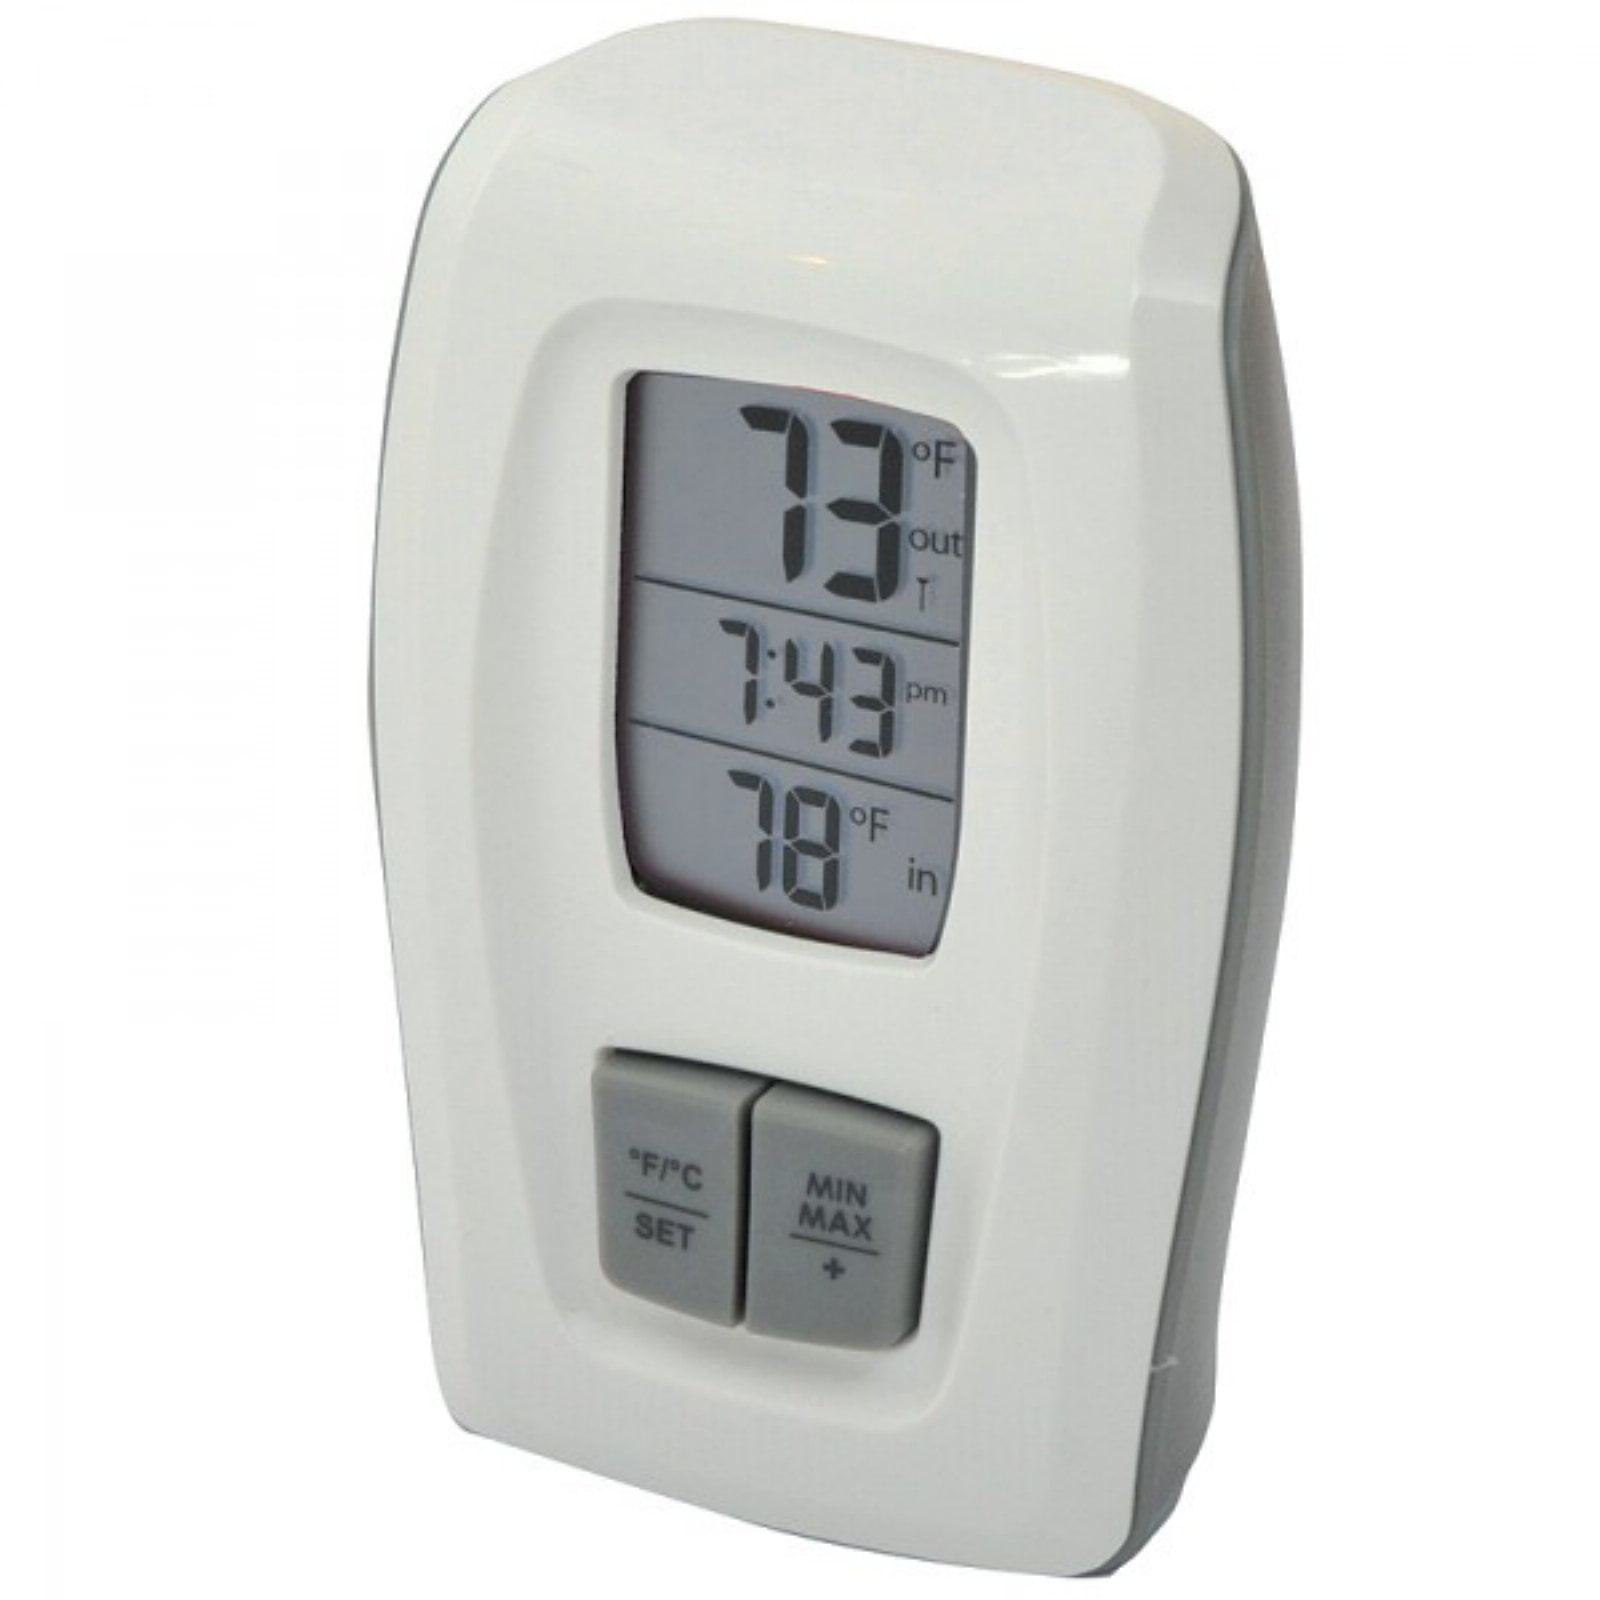 AcuRite 00888A3 Indoor/Outdoor Digital Thermometer,Silver,Small